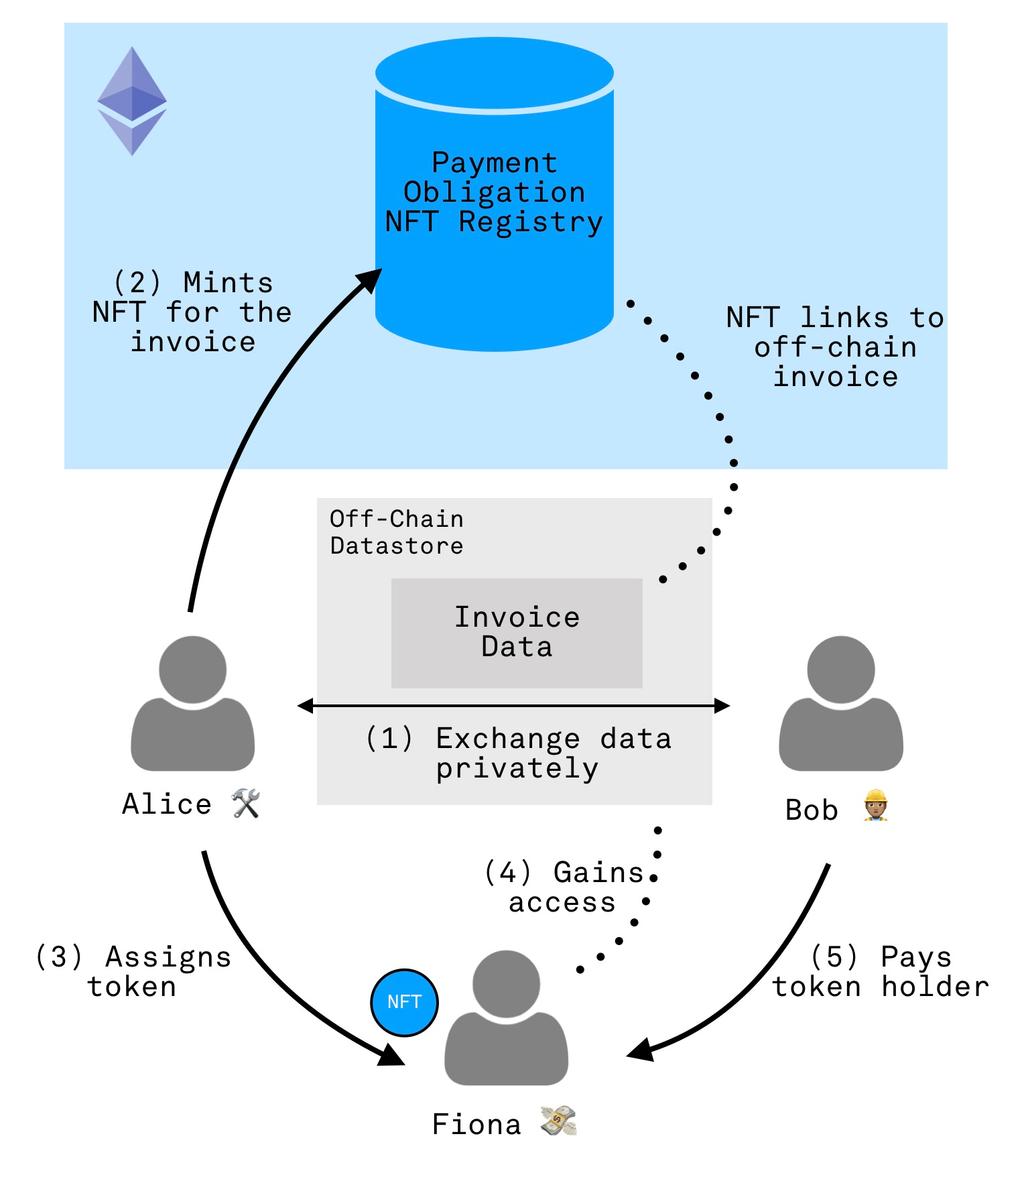 does not go into the specifics of the off-chain system and how to assure the data availability for the NFT owner.